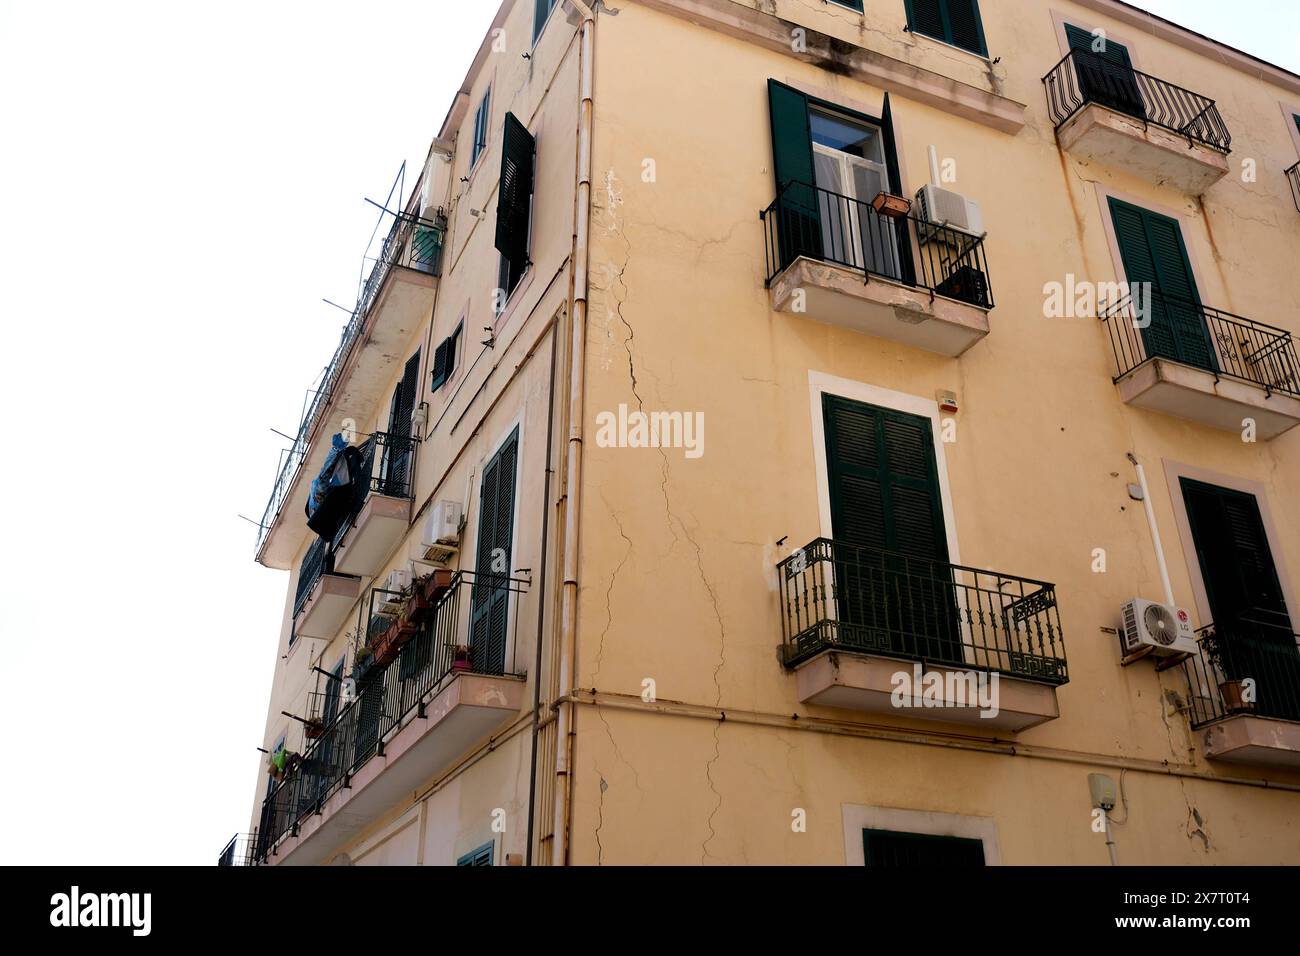 News - Campi Flegrei, the day after the tremors One of the buildings in Pozzuoli evacuated after yesterday s seismic swarm in which the strongest tremor was 4.4 on the Richter scale, 13 buildings were cleared, 39 families out of their homes. Napoli Pozzuoli Italy Copyright: xAntonioxBalascox/xLiveMediax LPN 1364928 Stock Photo